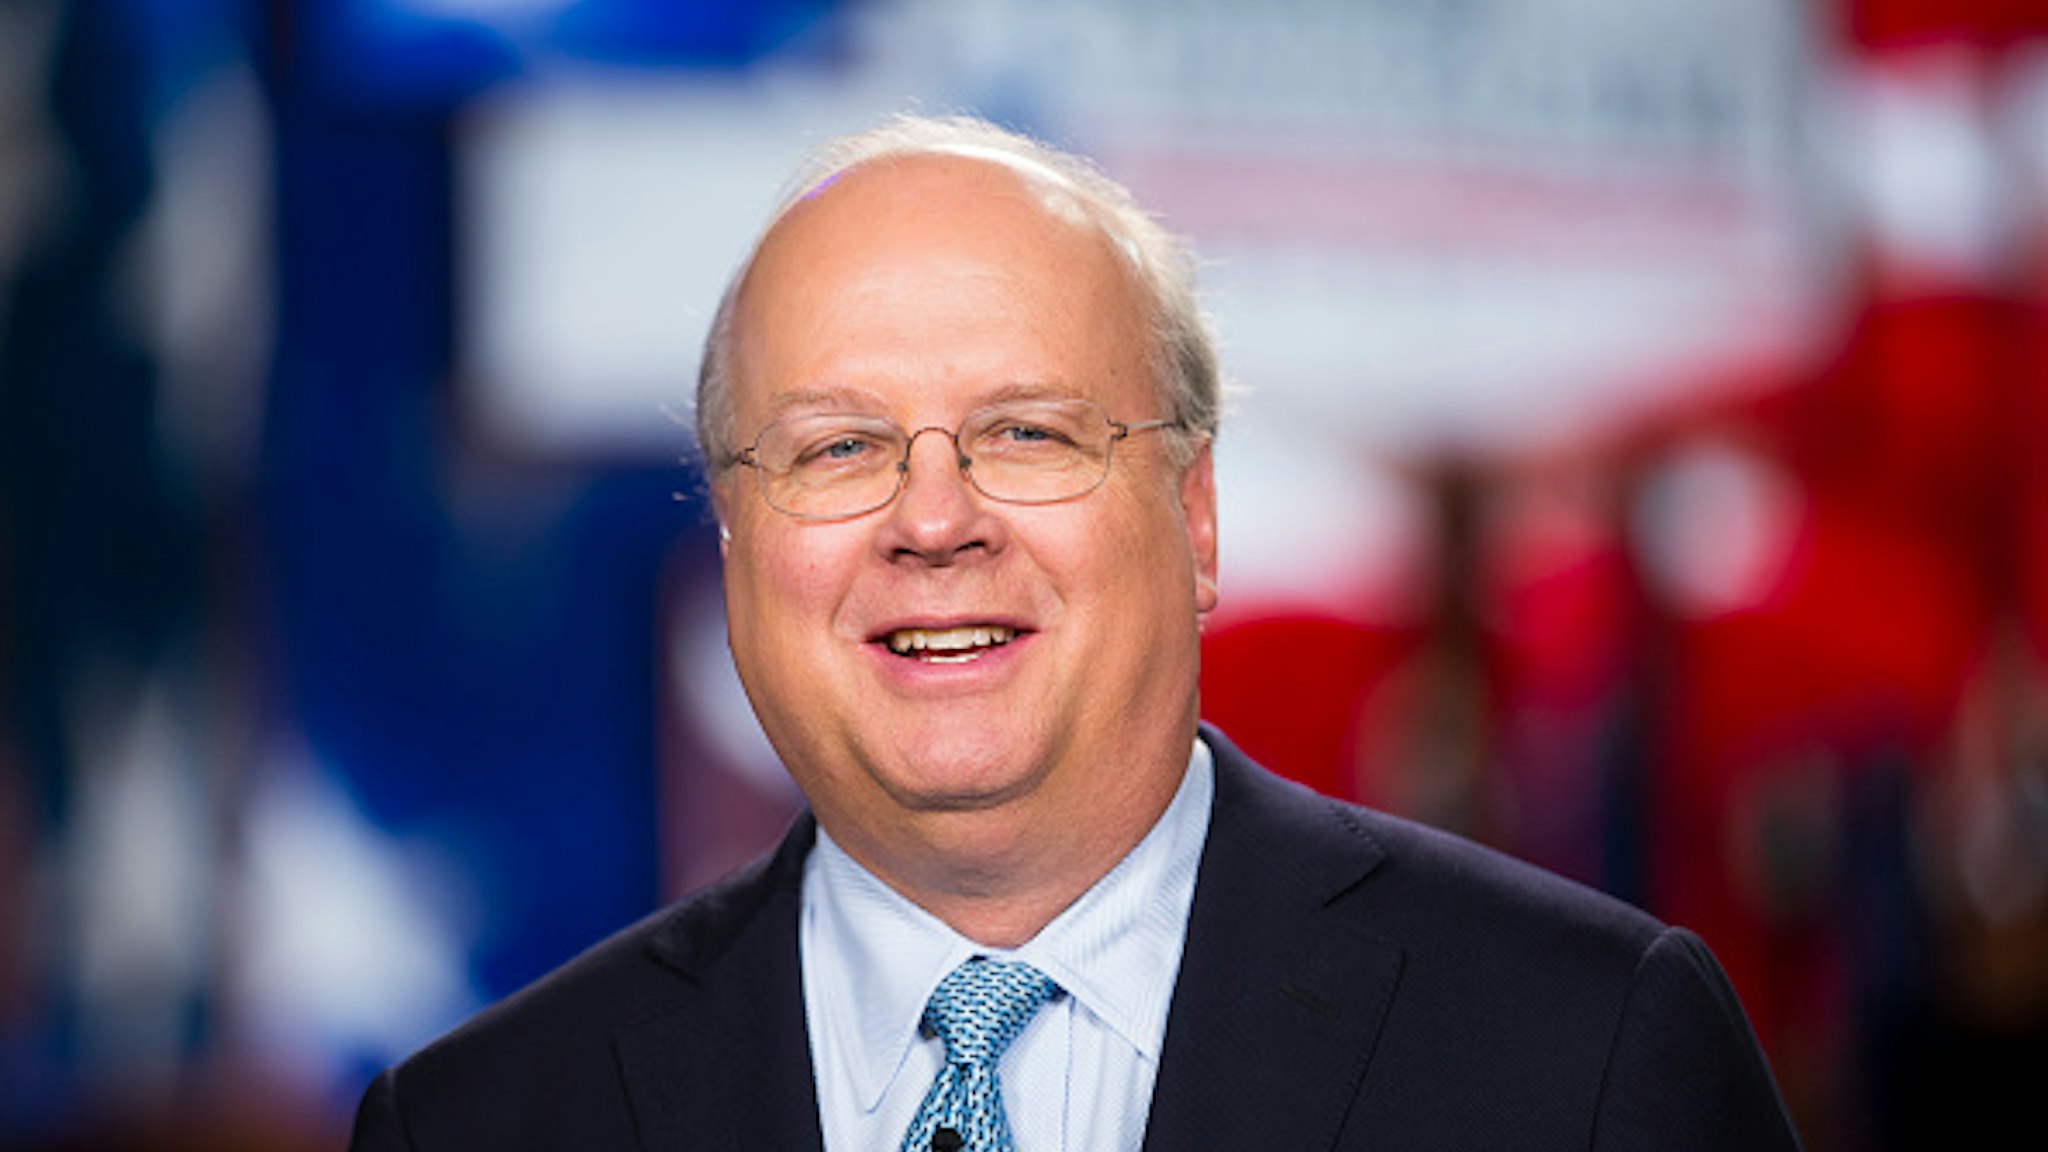 Republican strategist and fundraiser Karl Rove at the Republican National Convention in Tampa, Fla. Rove runs the powerful Super PAC American Crossroads